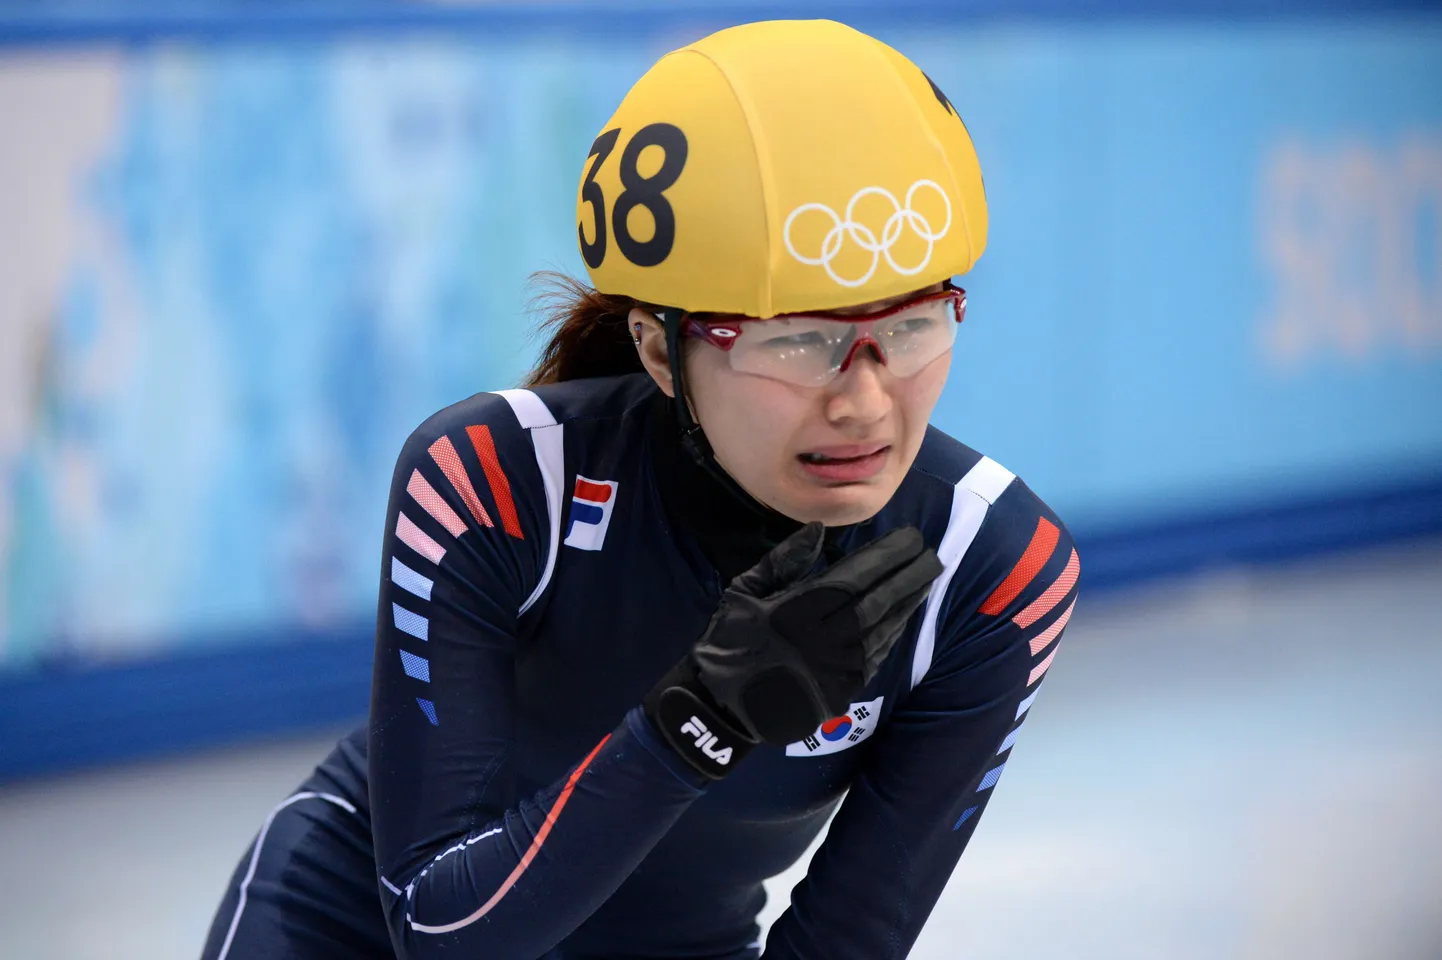 South Korea's Park Seung-Hi cries after winning the Women's Short Track 1000 m Final at the Iceberg Skating Palace during the Sochi Winter Olympics on February 21, 2014. AFP PHOTO / YURI KADOBNOV